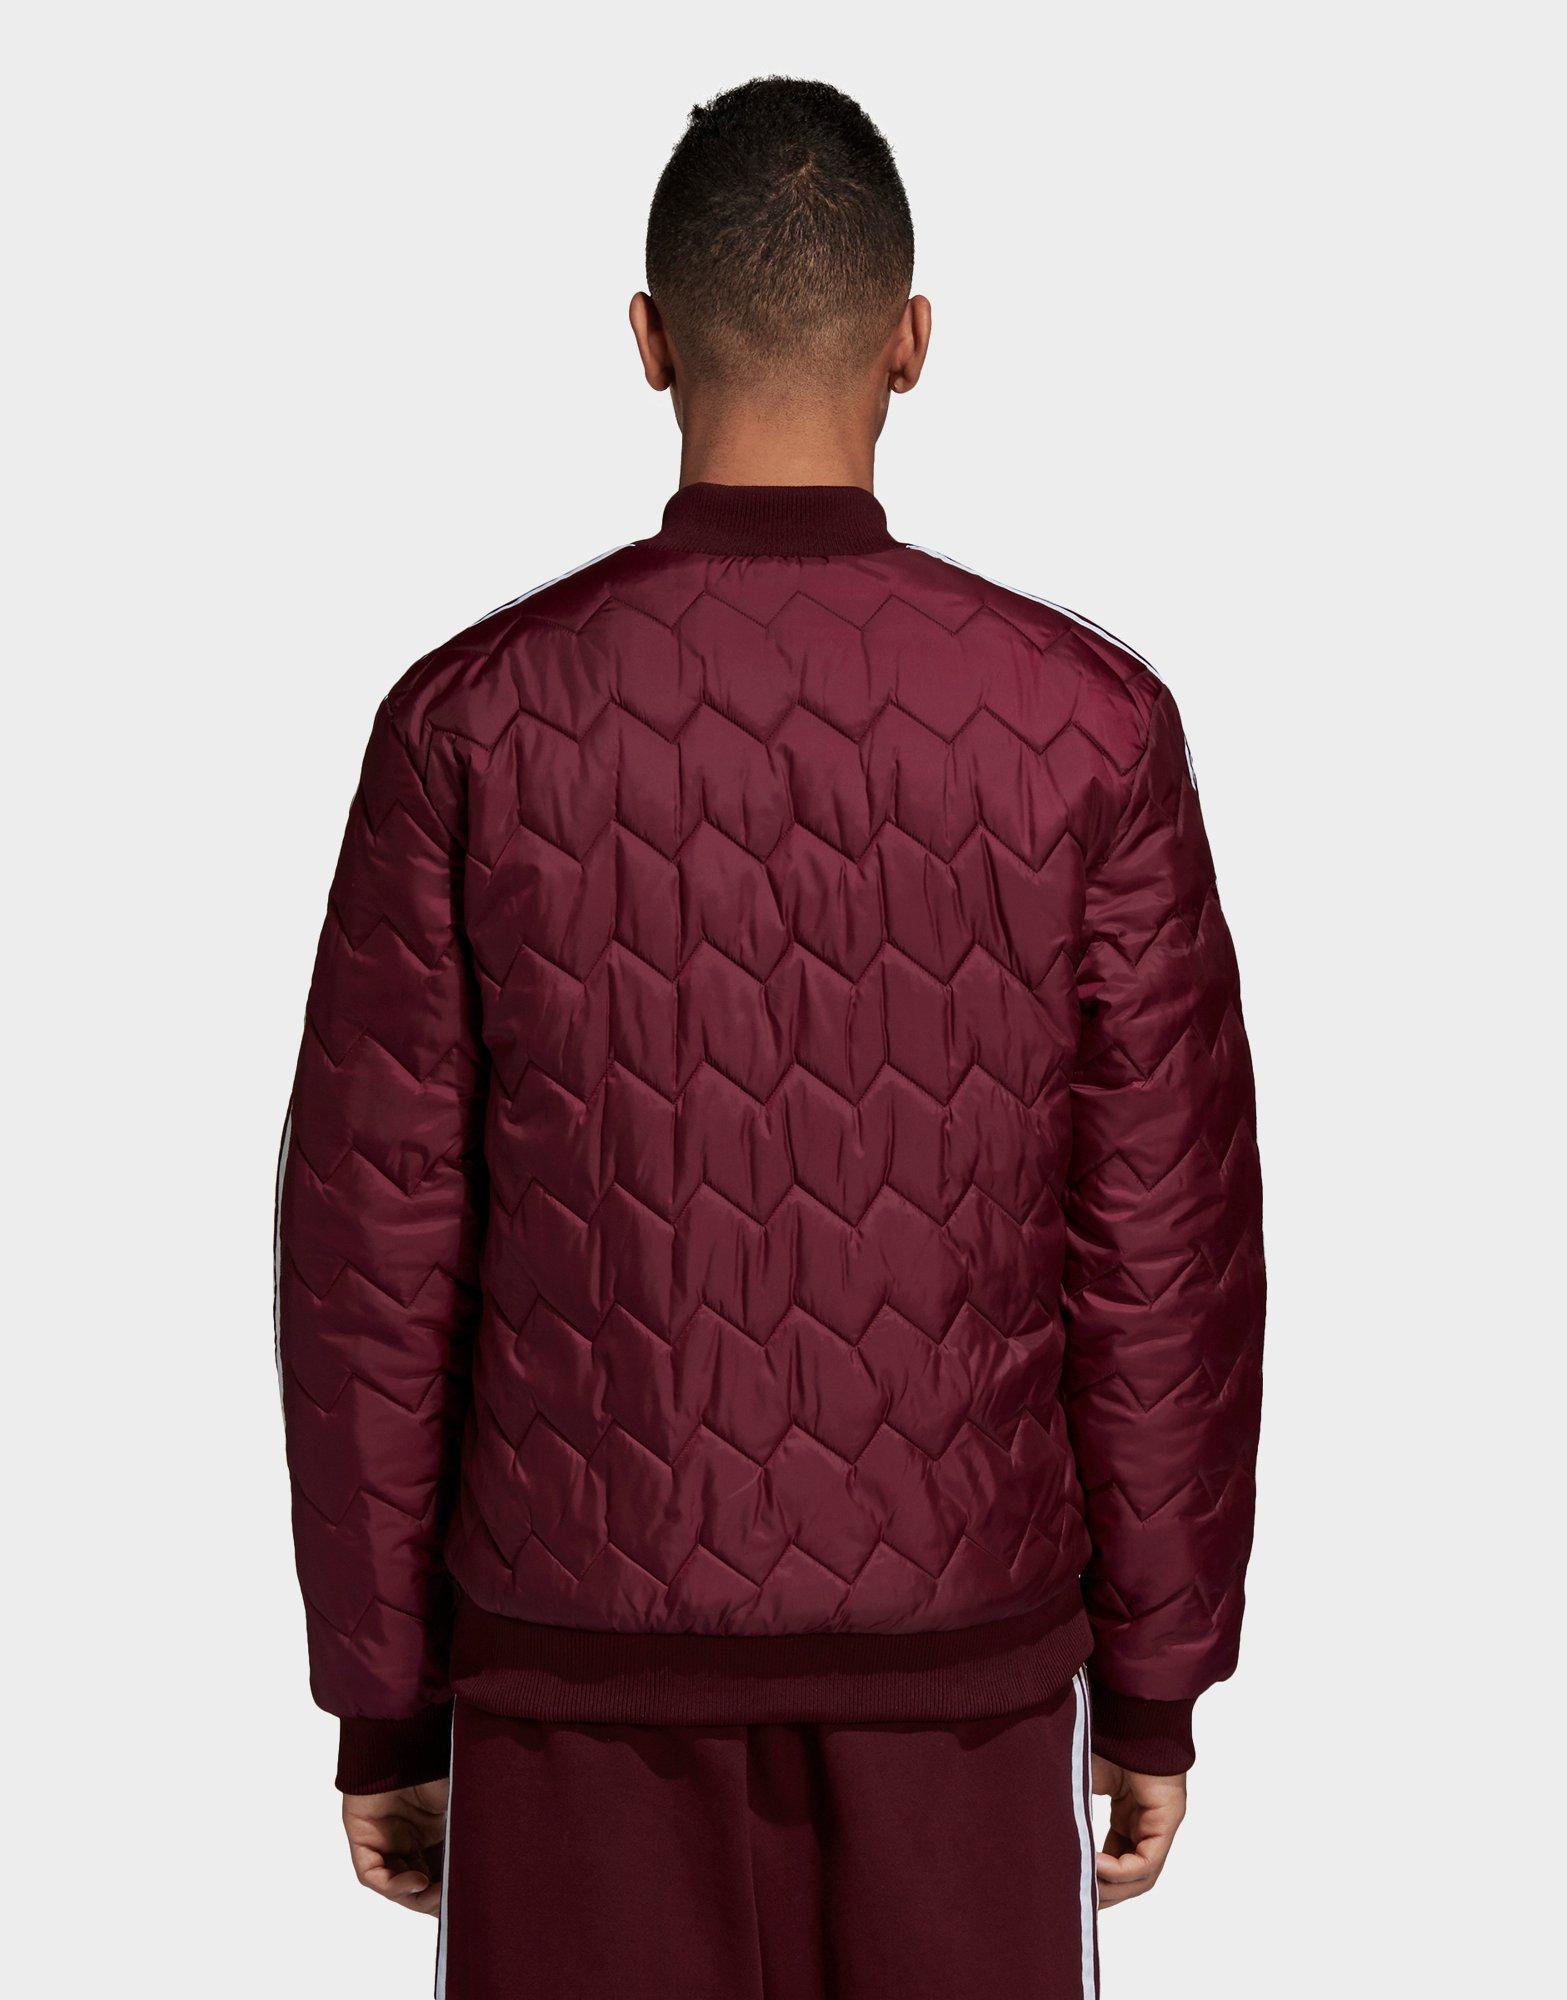 adidas sst quilted jacket red